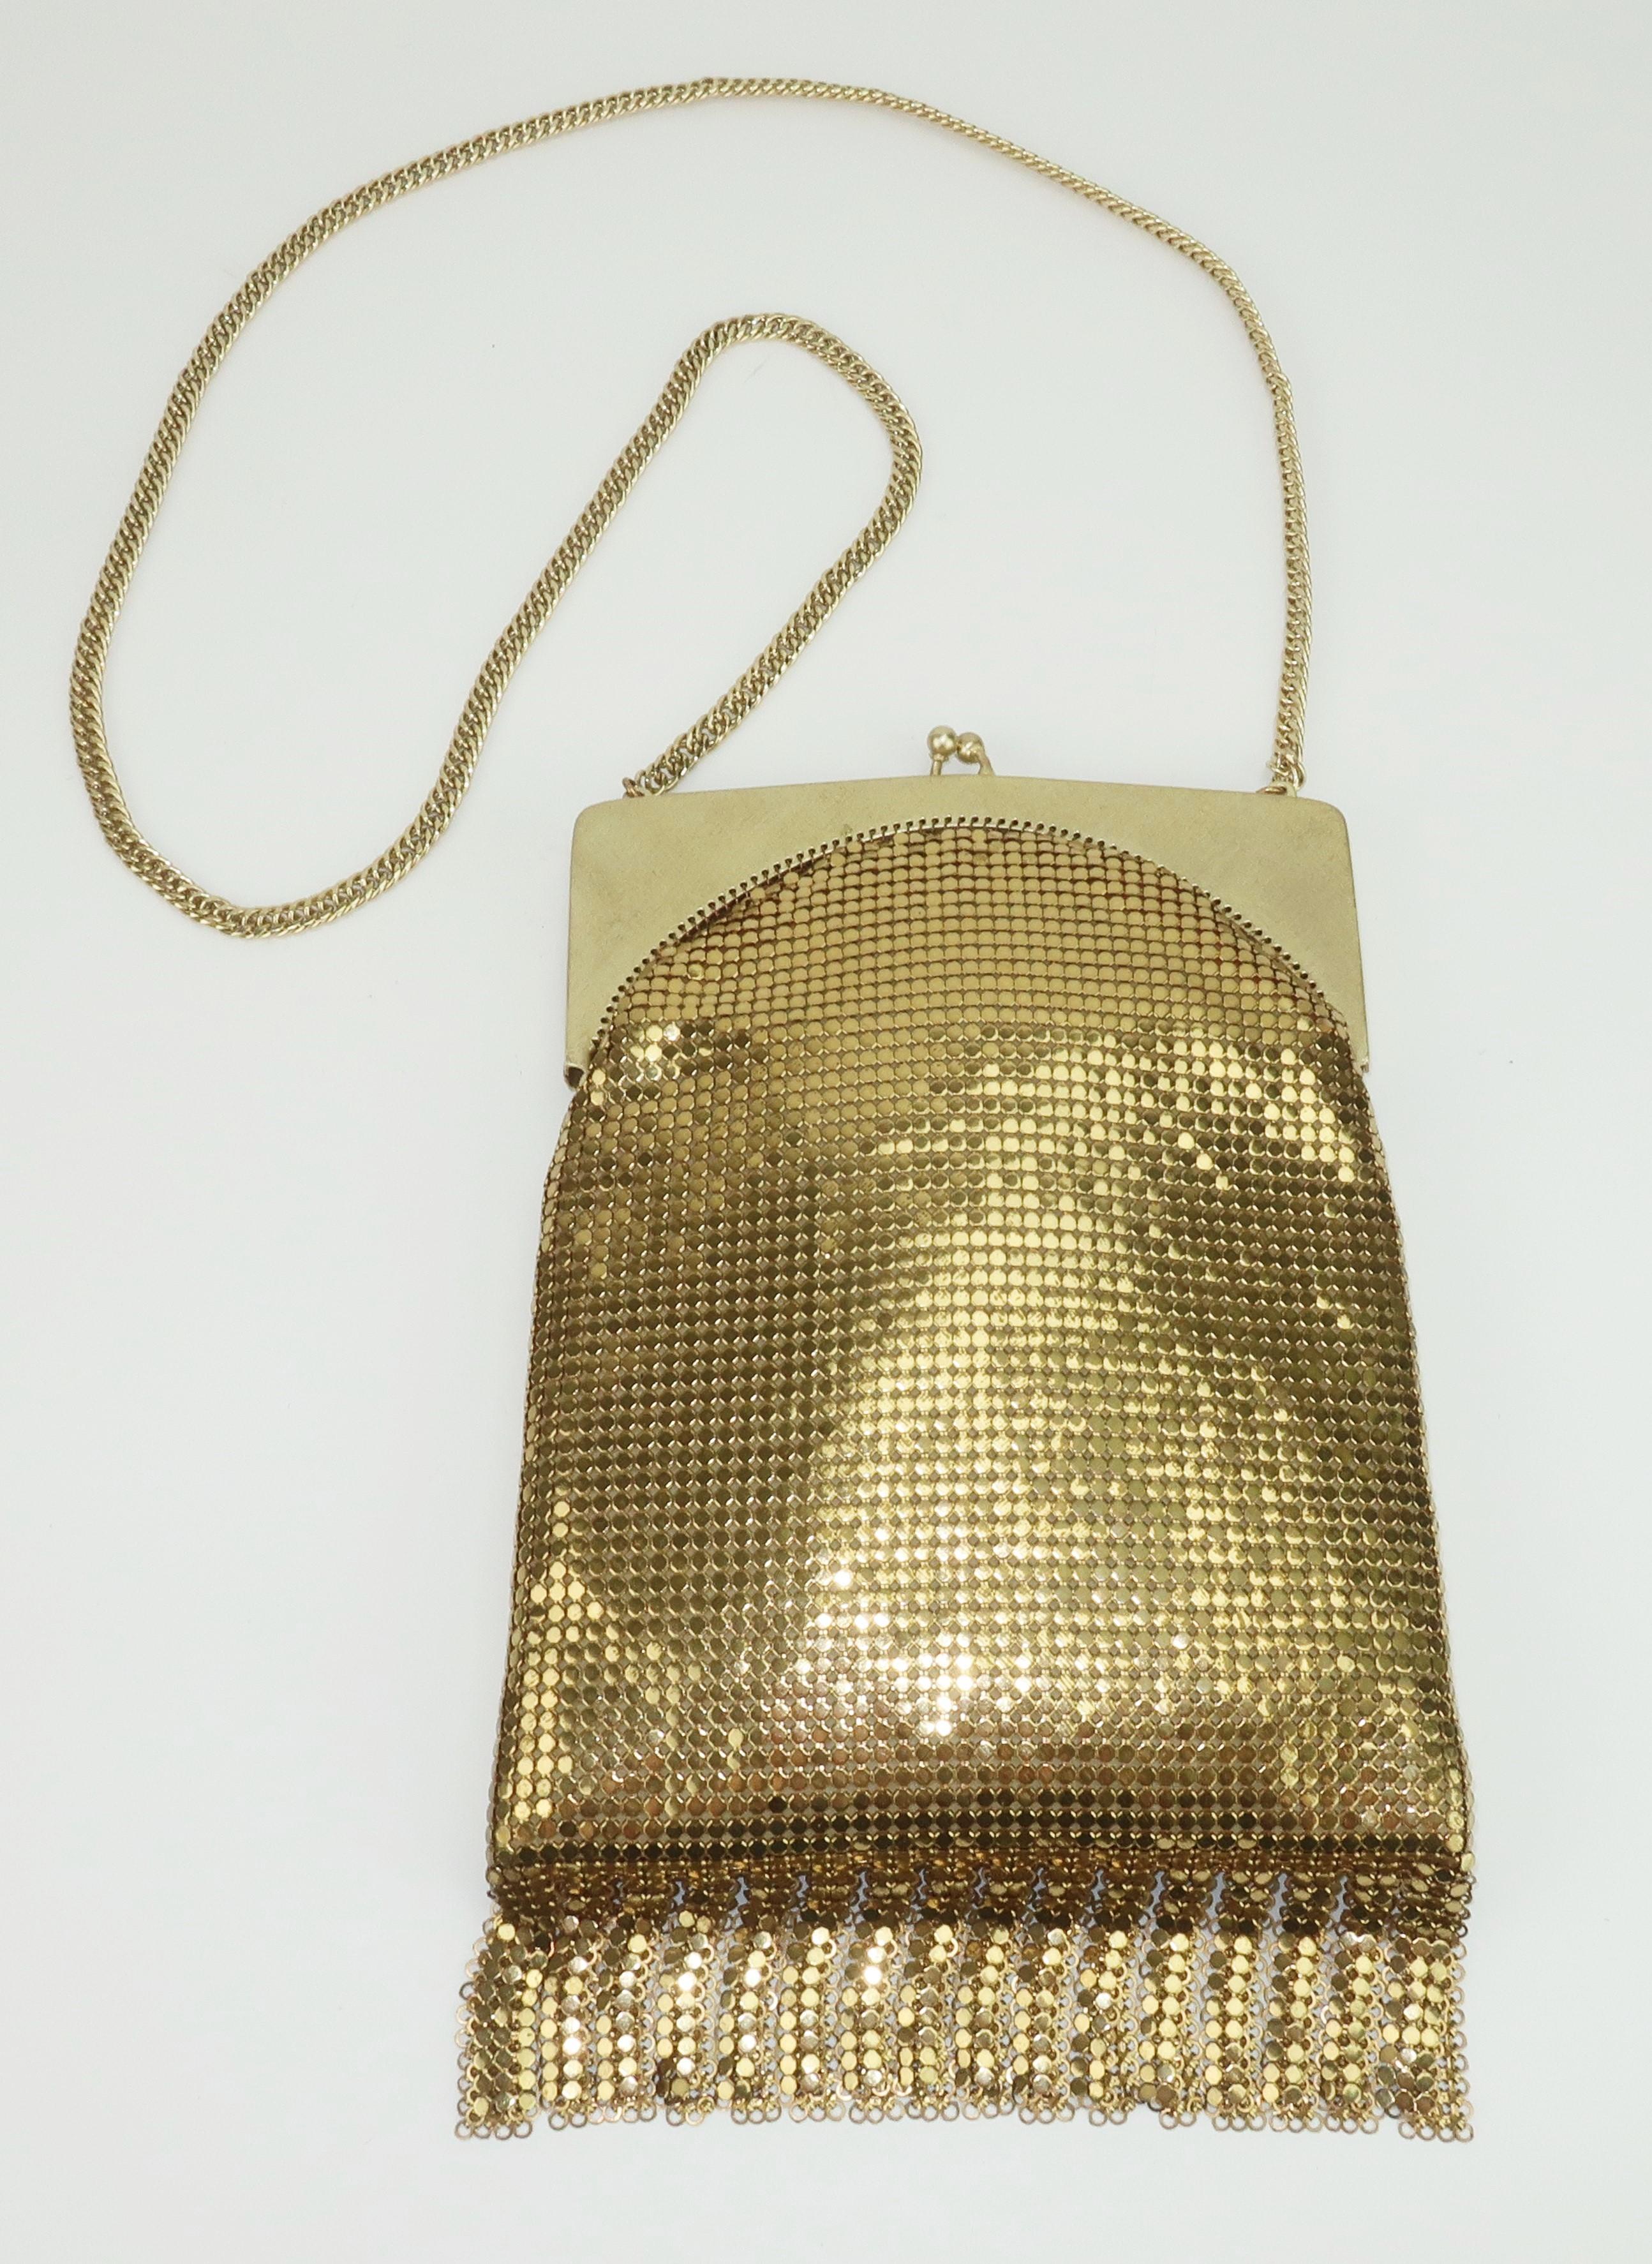 This 1960's mod evening gold mesh handbag by Whiting & Davis will take you from deco to disco!  Whiting & Davis has been producing fashionable handbags since the late 1800’s and their gold mesh designs represent classic American glamour.  The Art